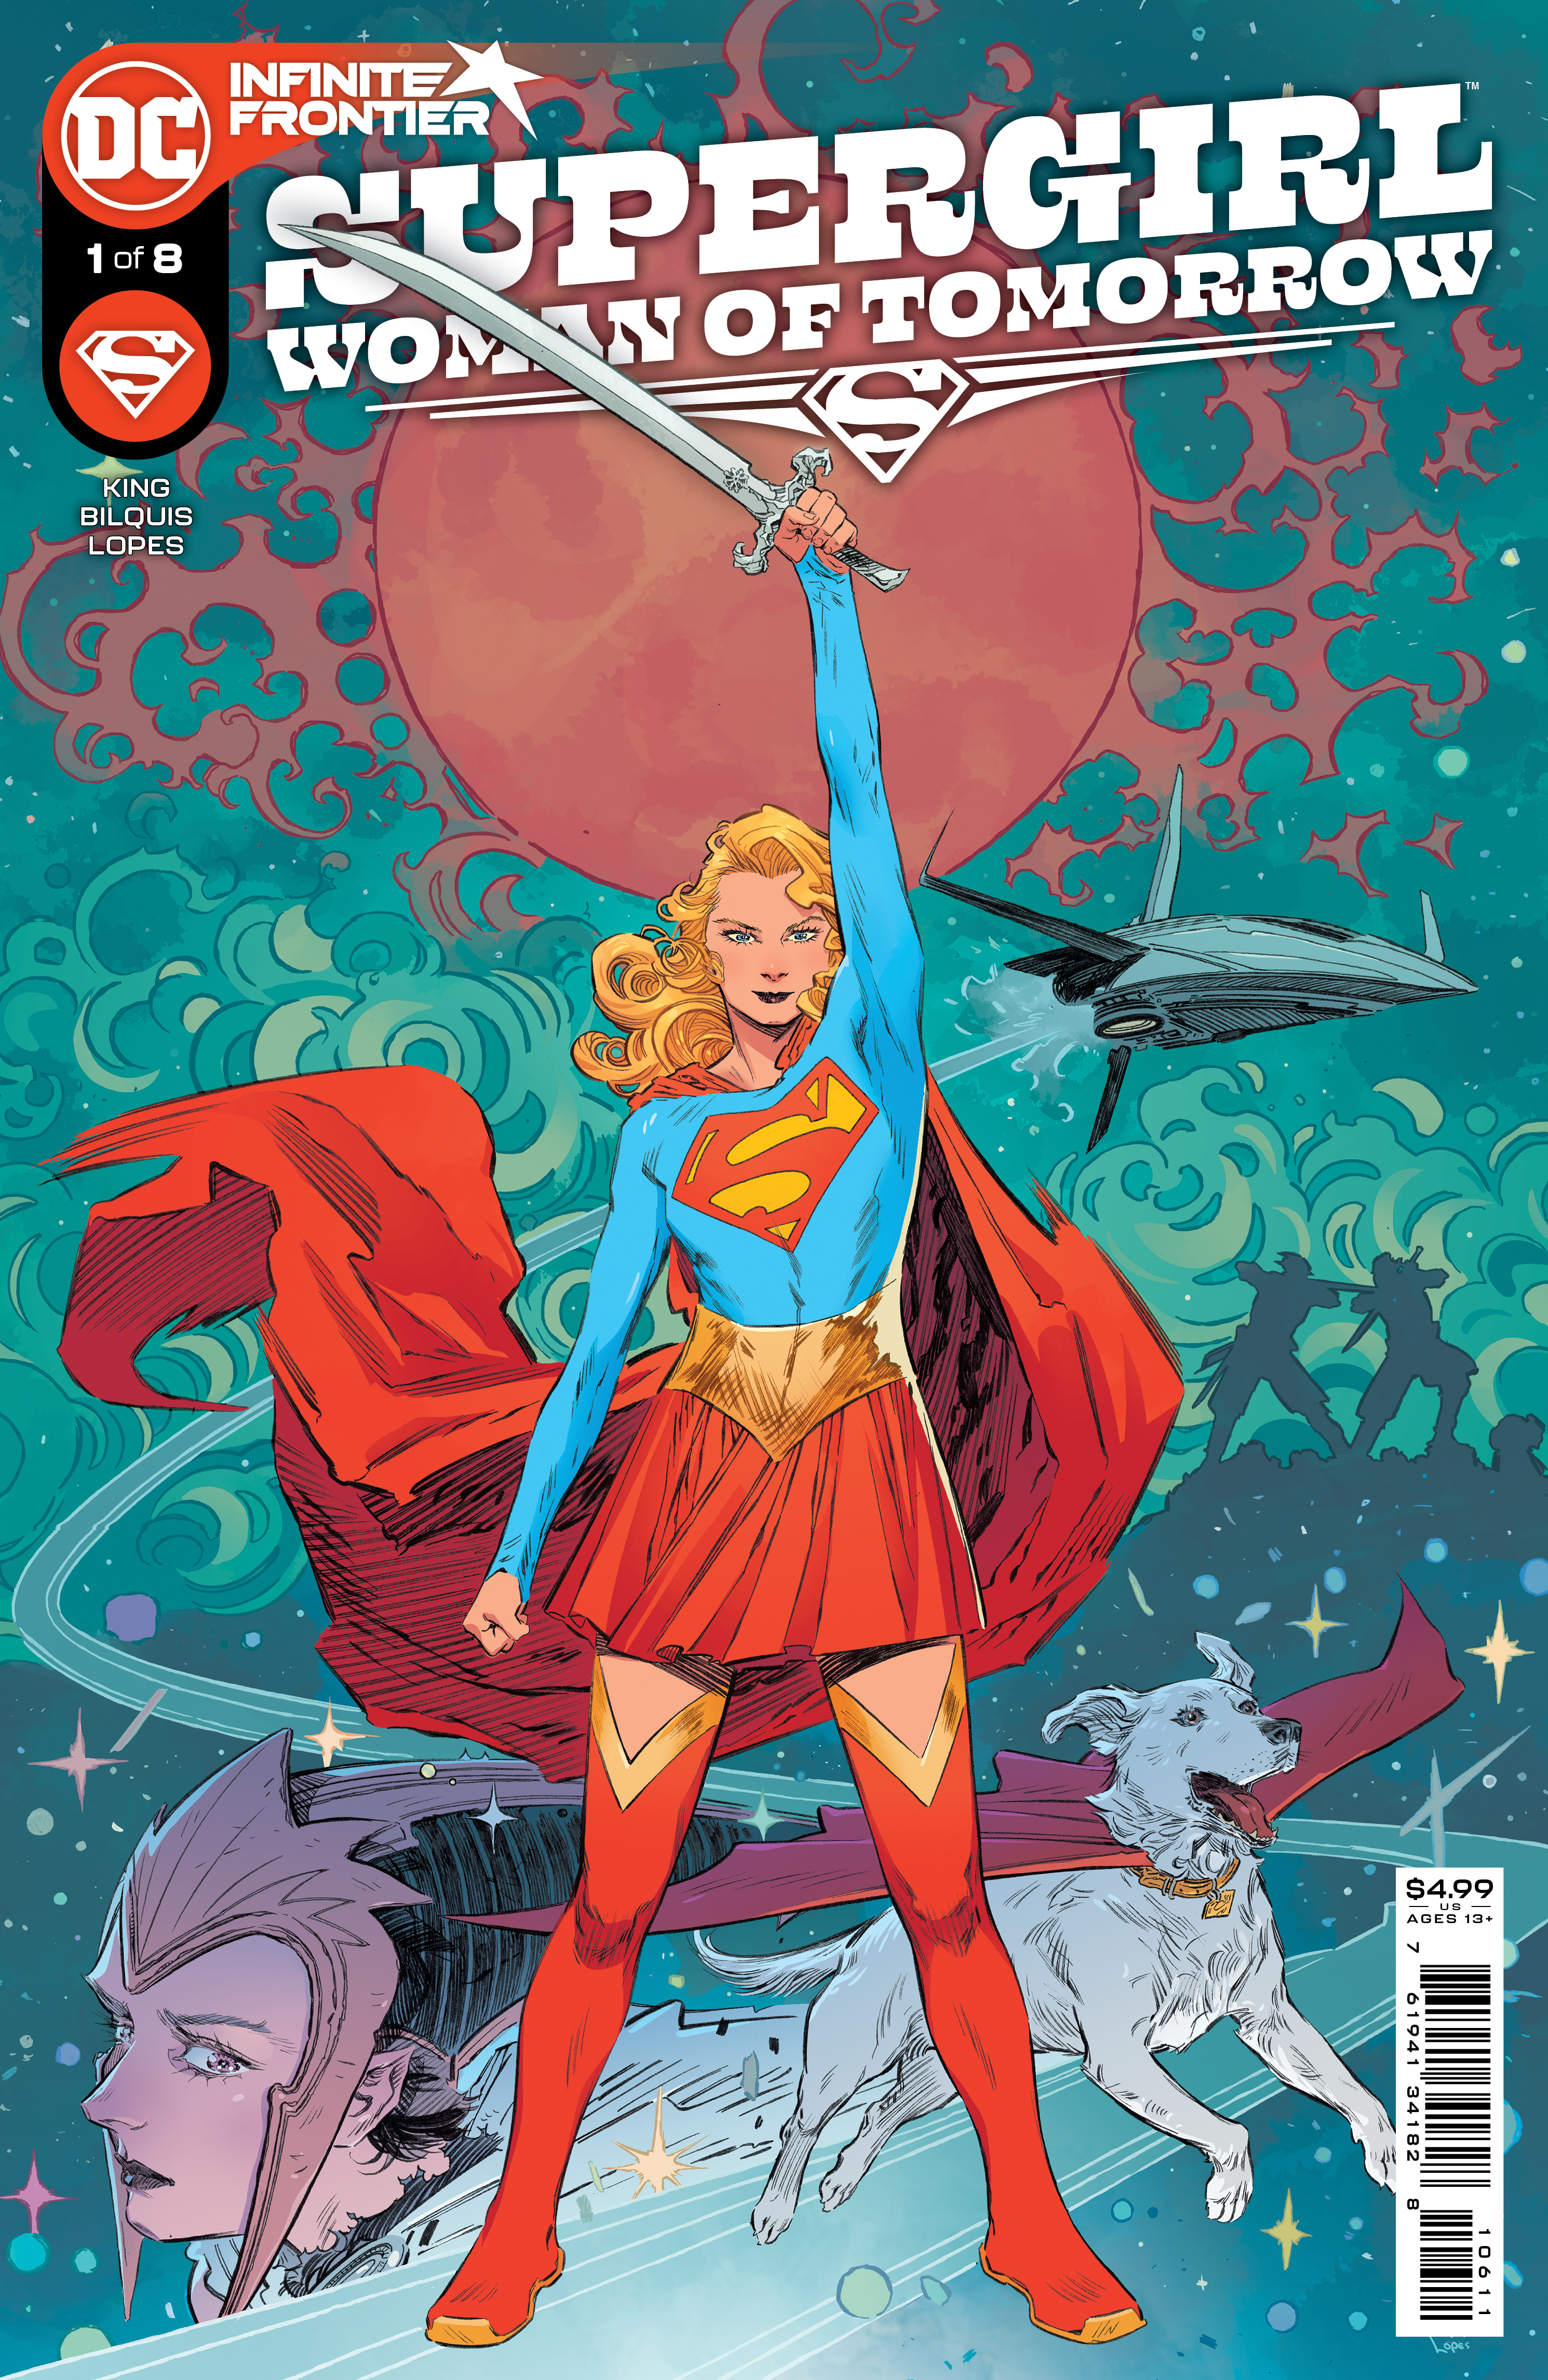 Supergirl Woman of Tomorrow #1 Cover A Bilquis Evely (Of 8)